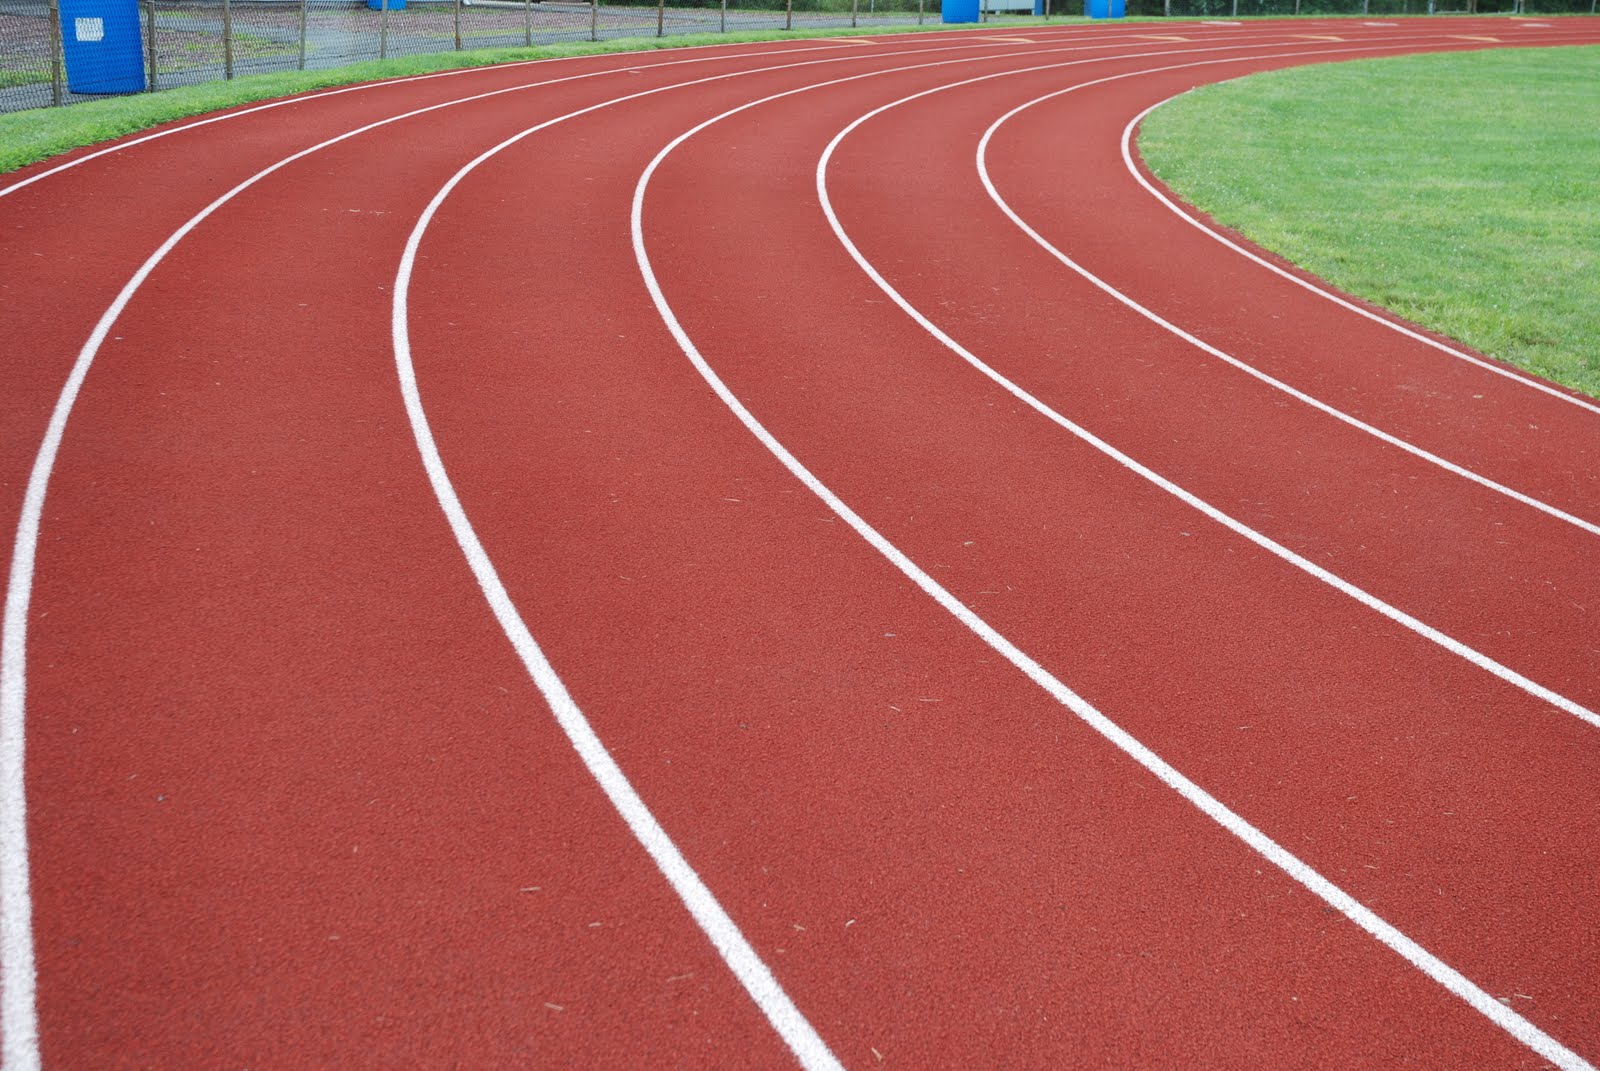 track and field wallpaper,track and field athletics,race track,sport venue,sports,athletics